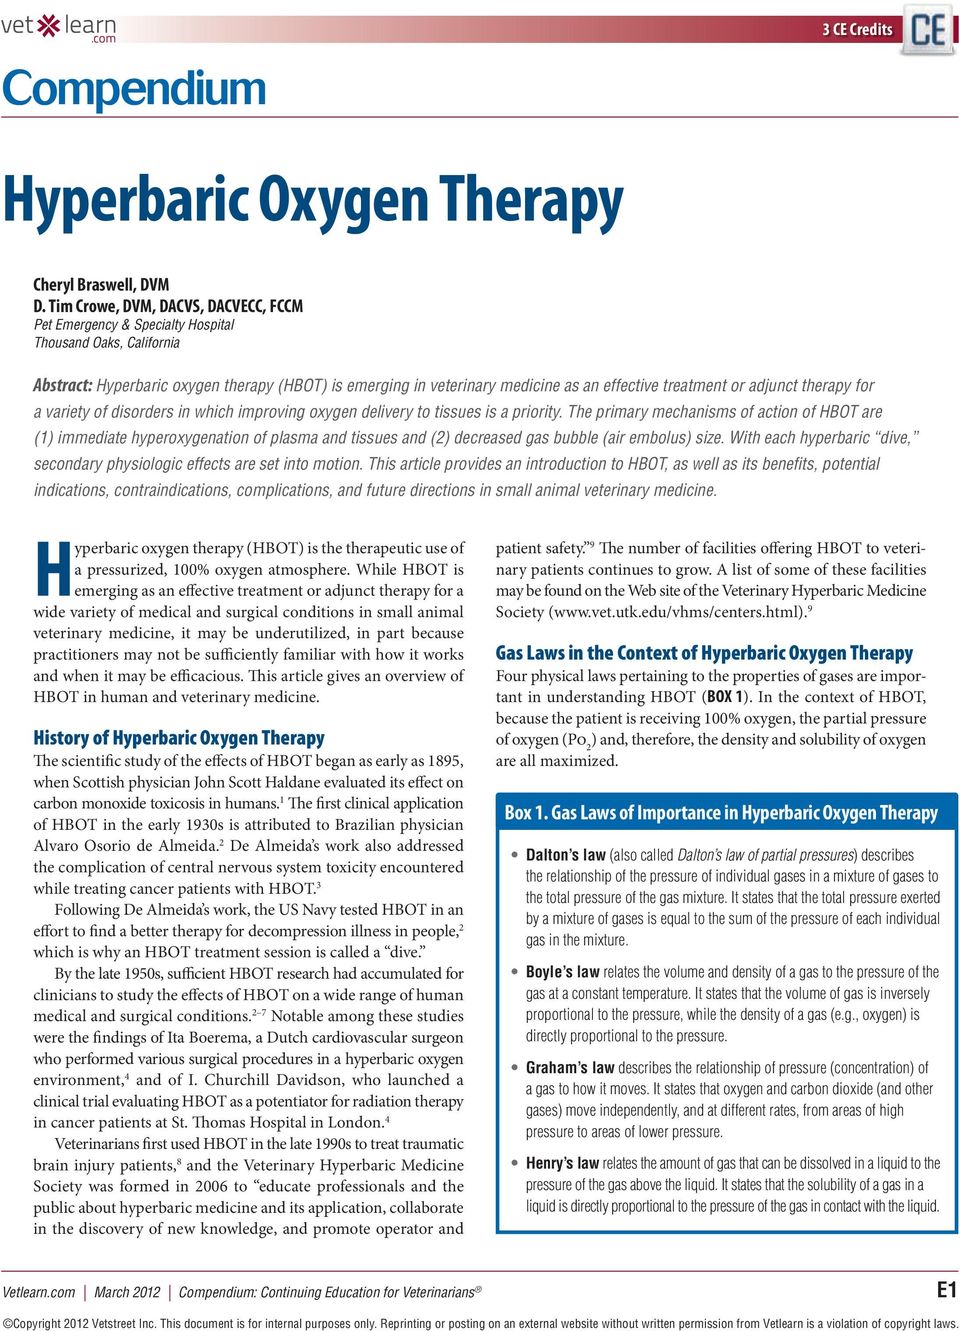 treatment or adjunct therapy for a variety of disorders in which improving oxygen delivery to tissues is a priority.